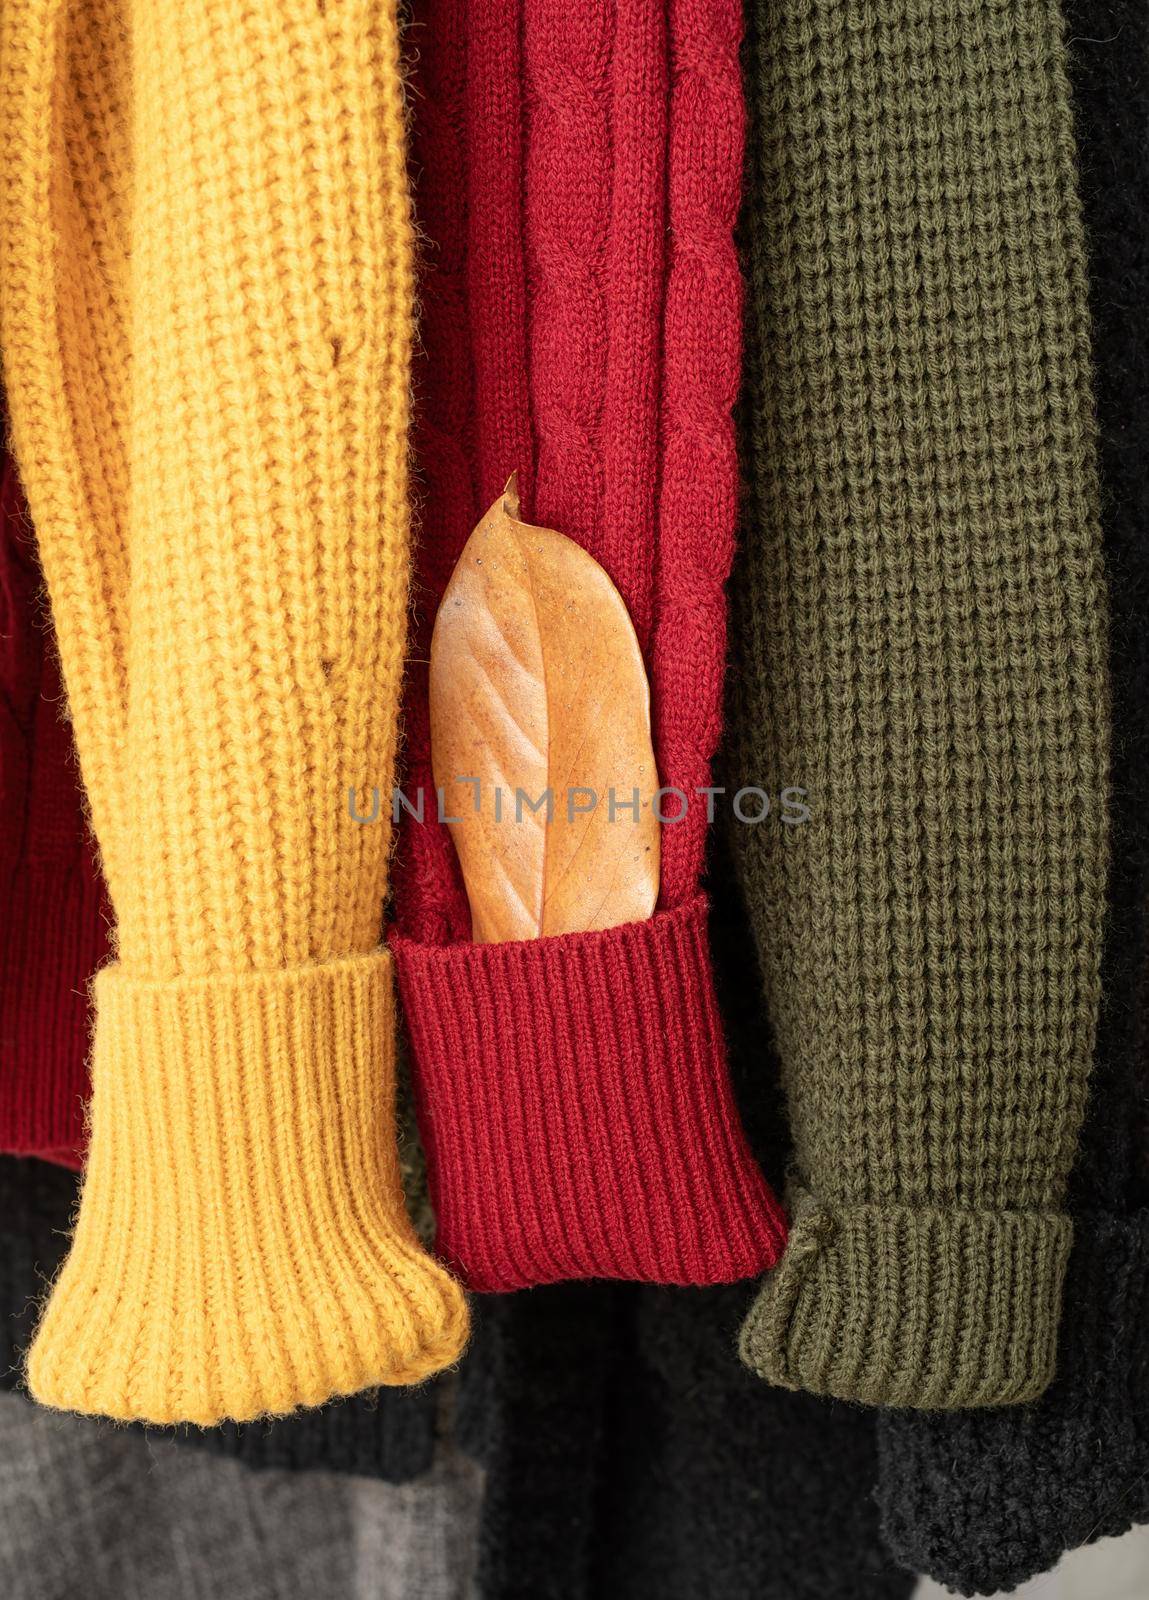 Row of different colorful Knitted sweaters hang on hangers, white background, autumn and winter season